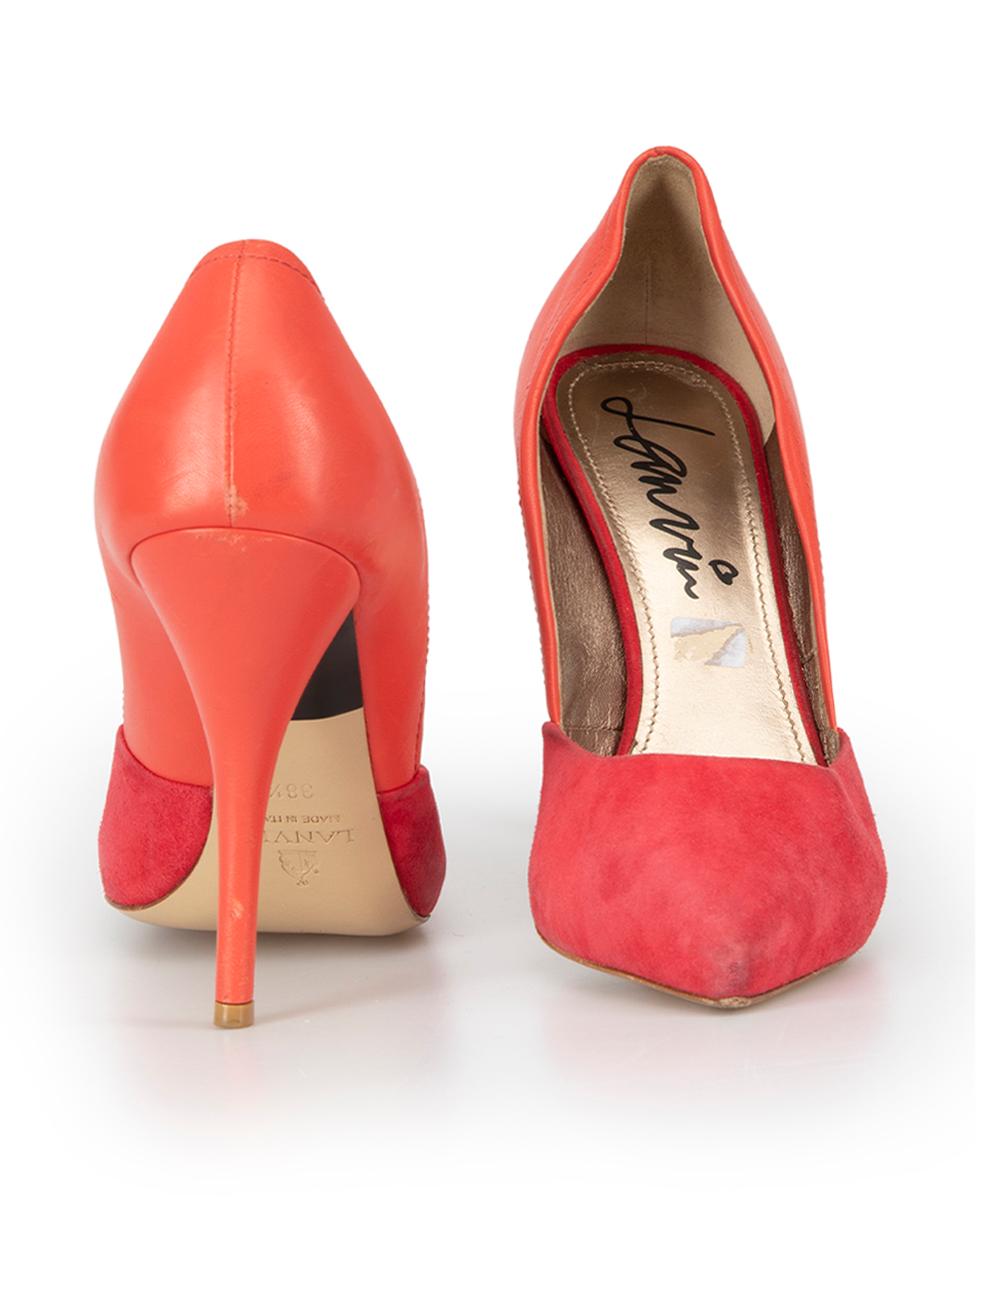 Lanvin Women's Red Suede & Leather Panel Pointed Toe Pumps In Good Condition For Sale In London, GB